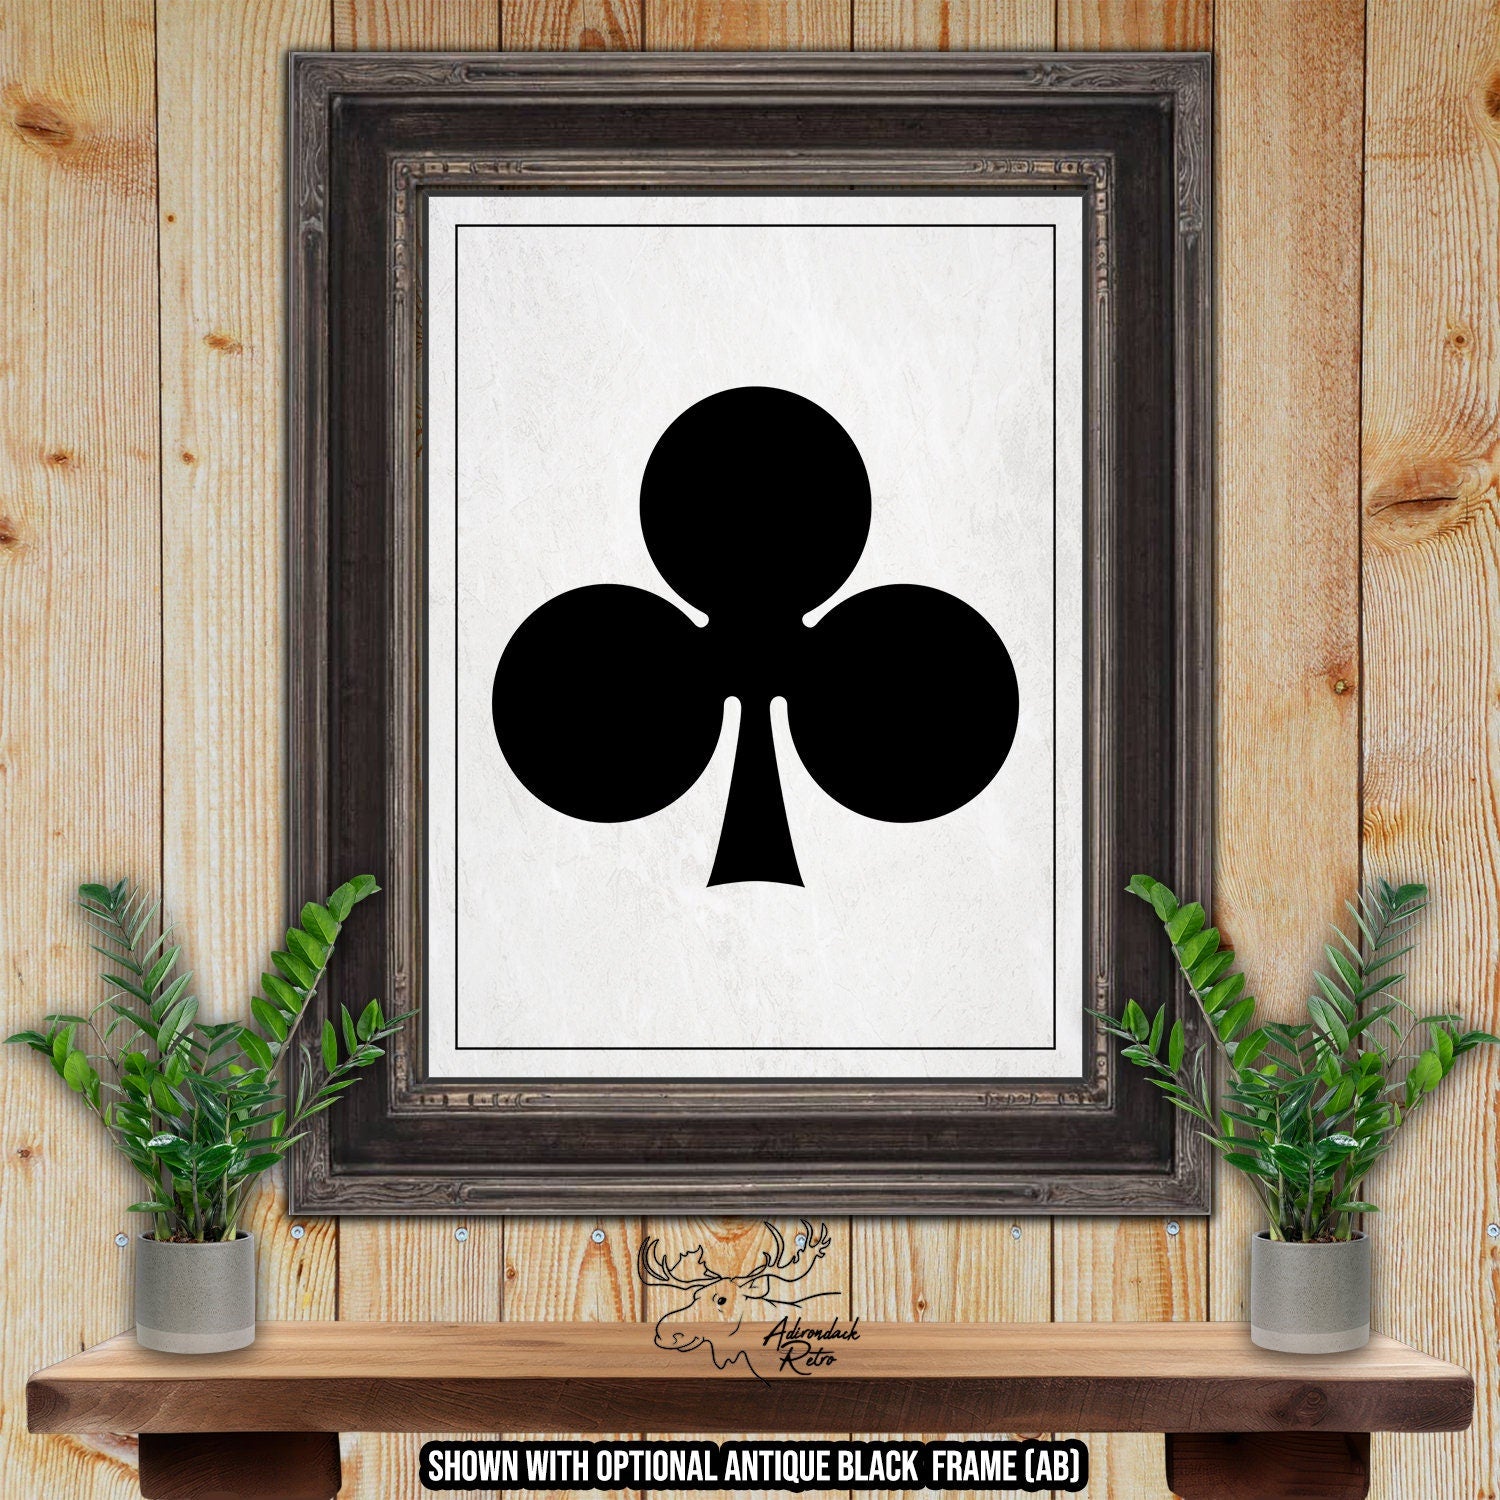 Clubs Playing Card Suit Giclee Fine Art Print at Adirondack Retro